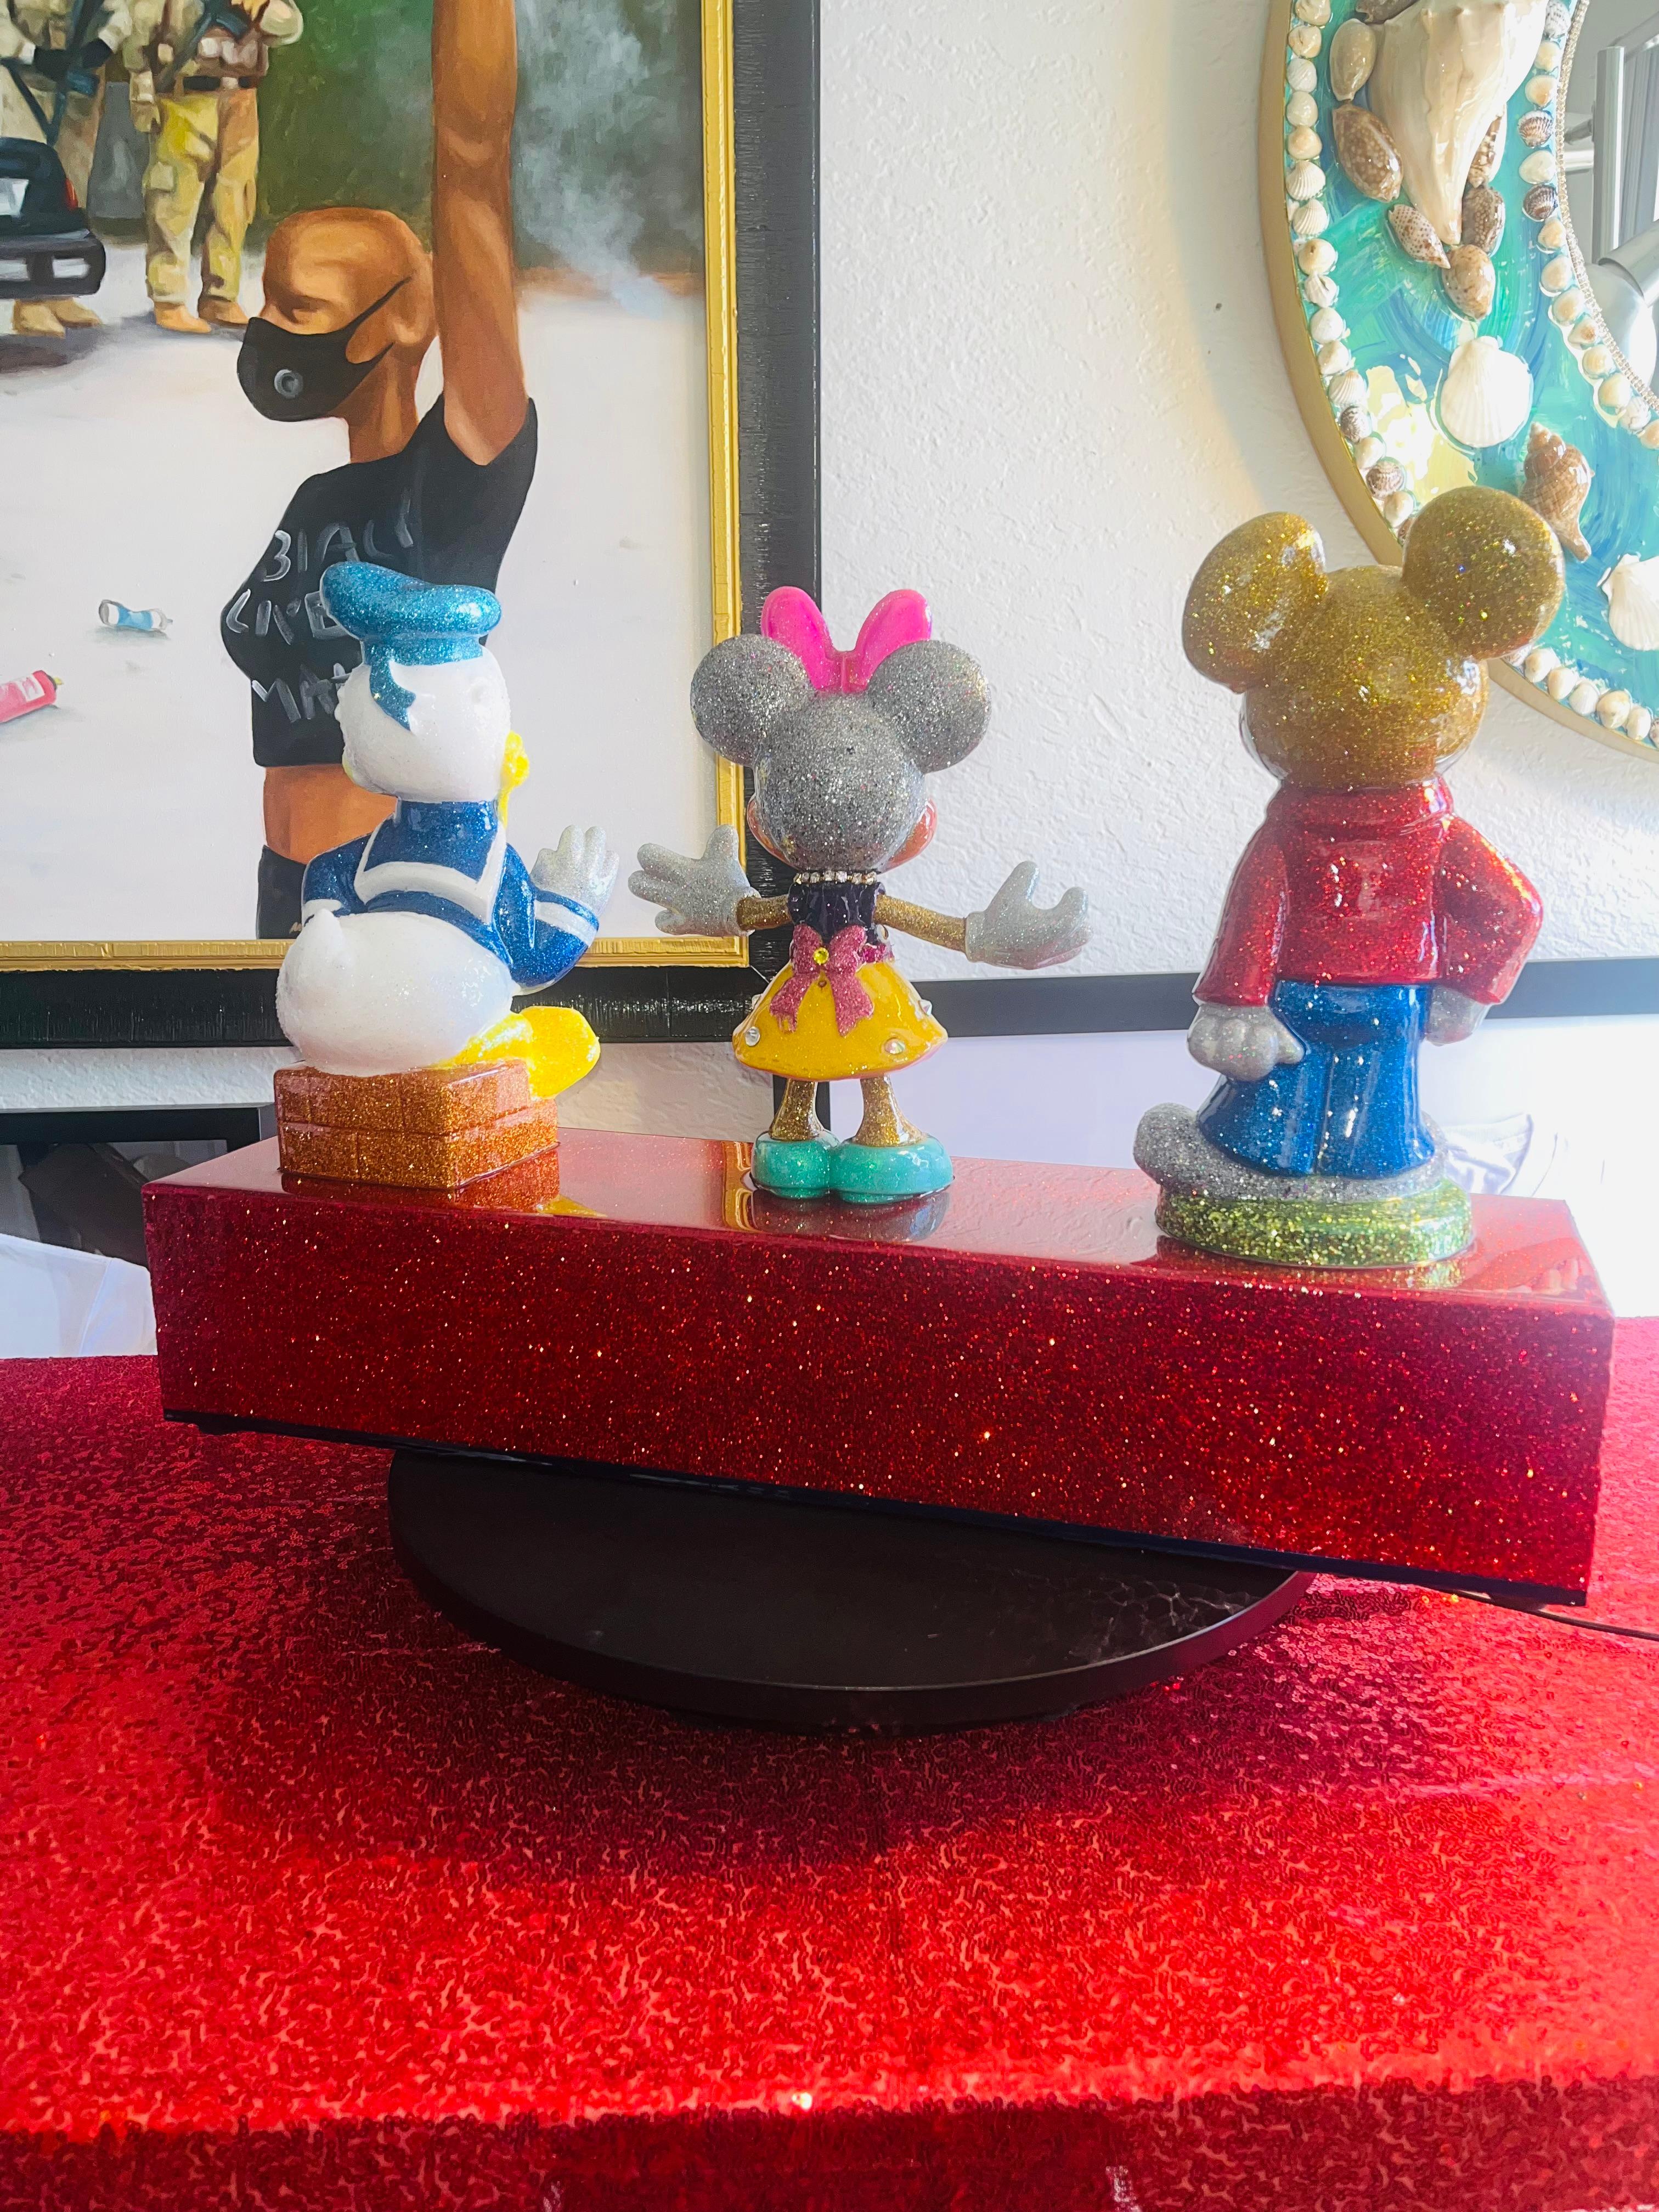                  **ANNUAL SUPER SALE UNTIL JUNE 15TH ONLY**
*This Price Won't Be Repeated Again This Year - Take Advantage Of It*

TRIO AMIGOS is the collectors' Toy/Disney pieces must have because it is unique in creation and technique; you won't